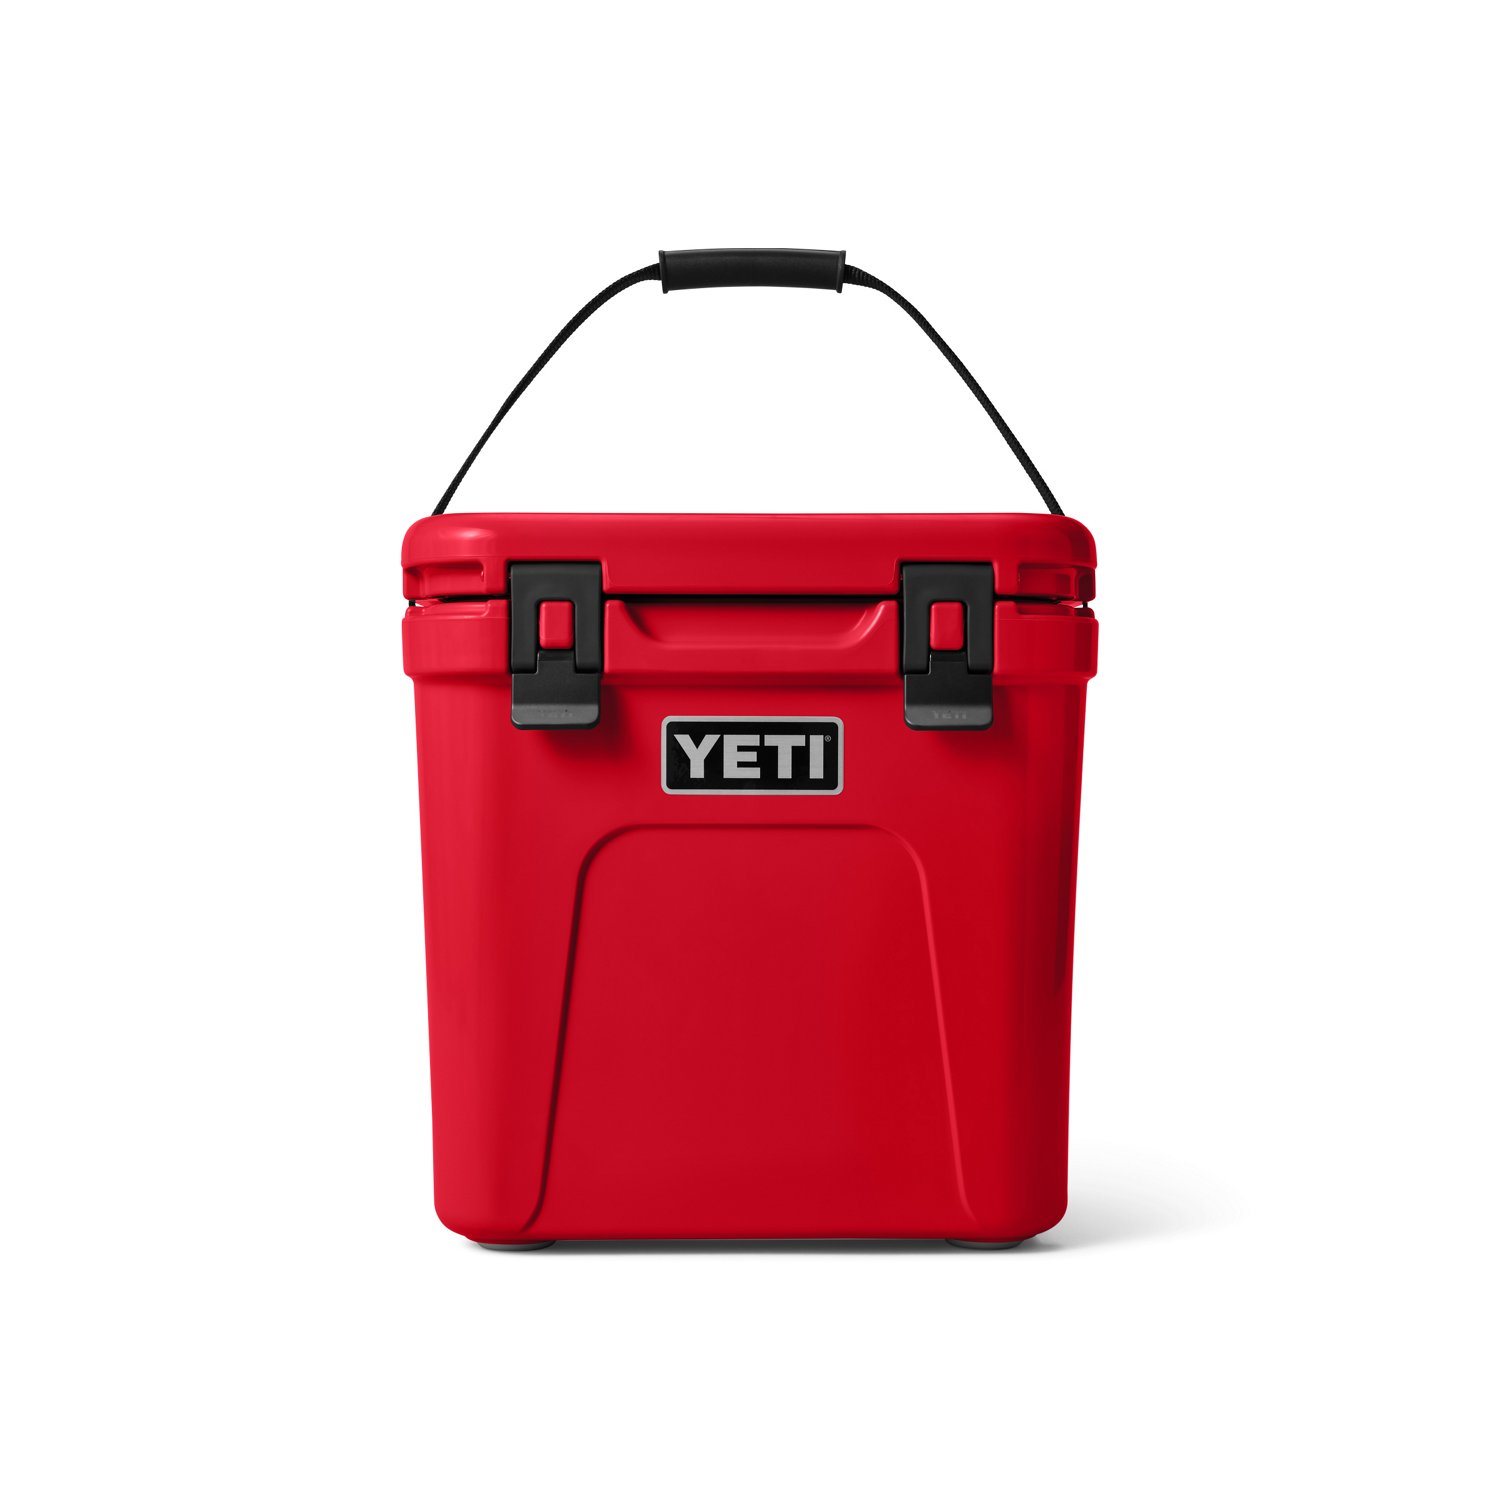 https://academy.scene7.com/is/image/academy//coolers/yeti-roadie-24-hard-cooler-10022350000-red/a9b1566f1797407b84cad67797b78bd8?$pdp-mobile-gallery-ng$